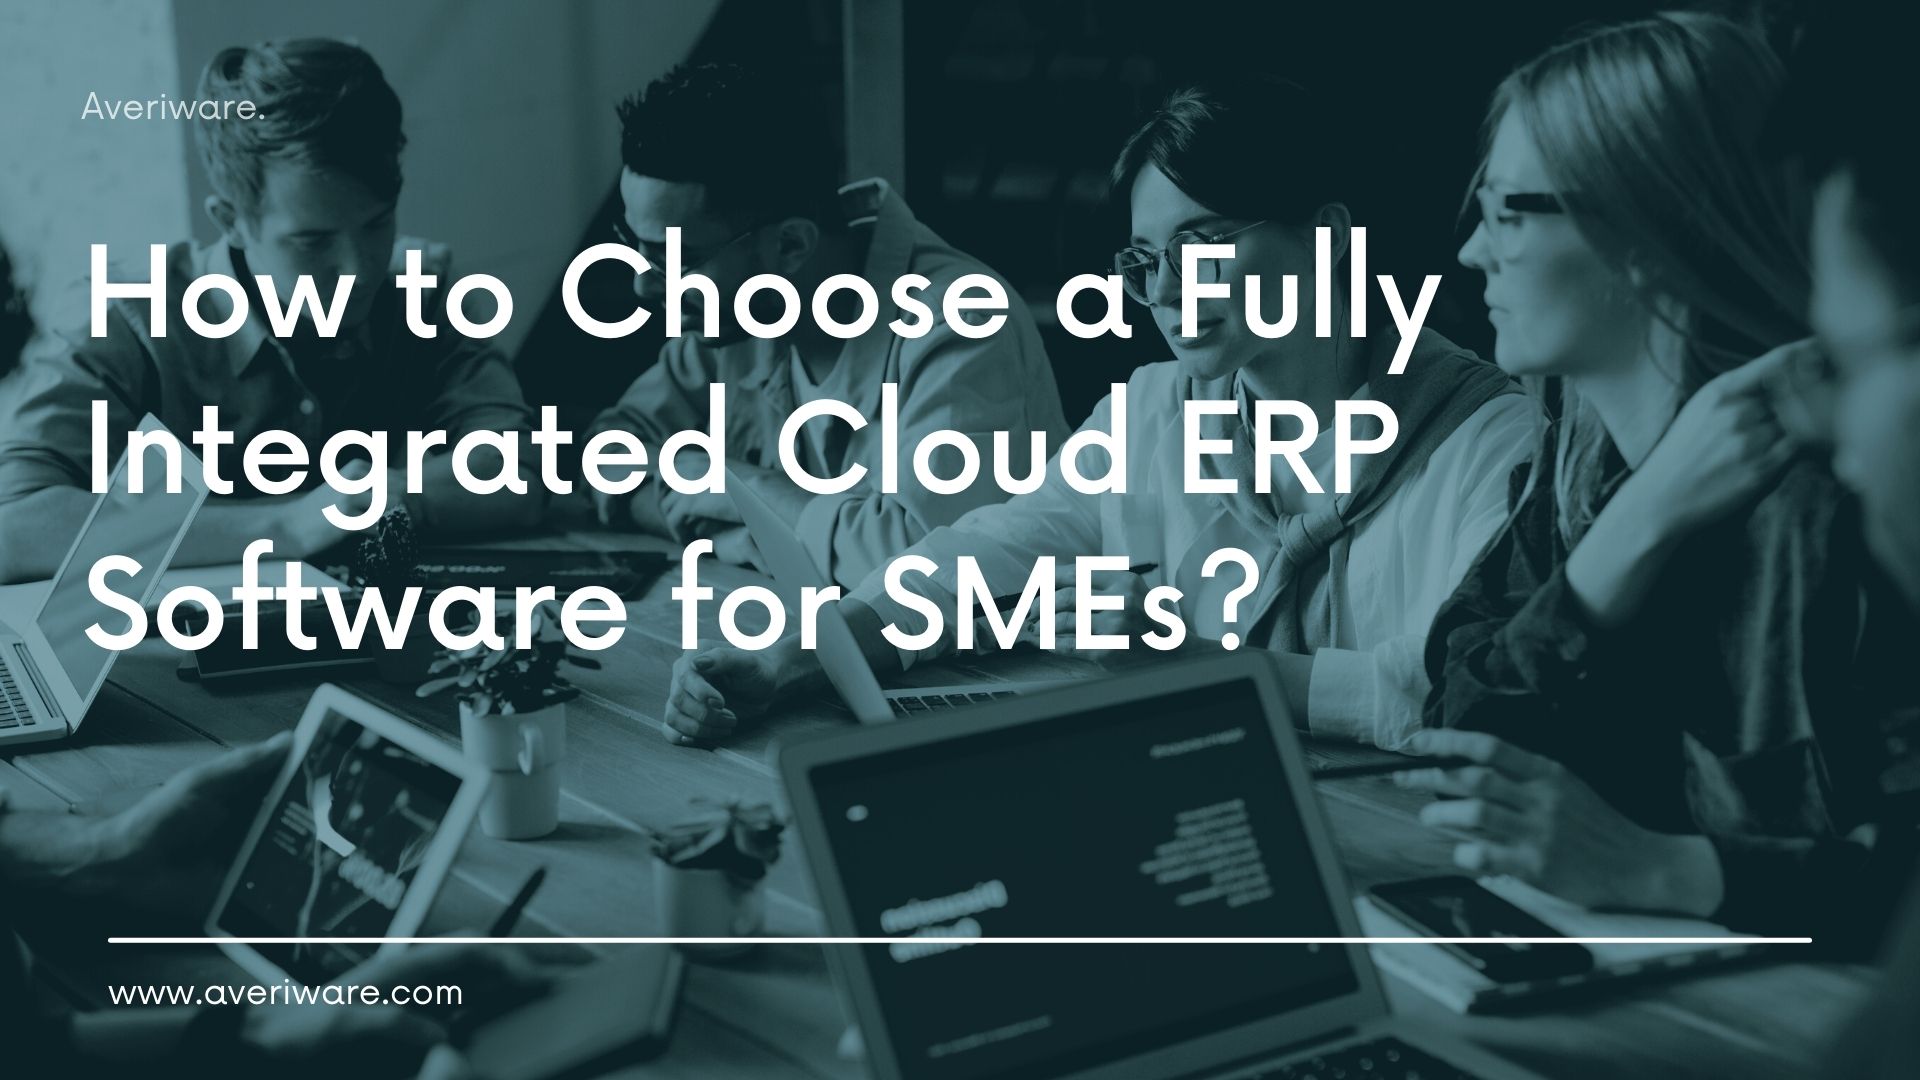 How to Choose a Fully Integrated Cloud ERP Software for SMEs